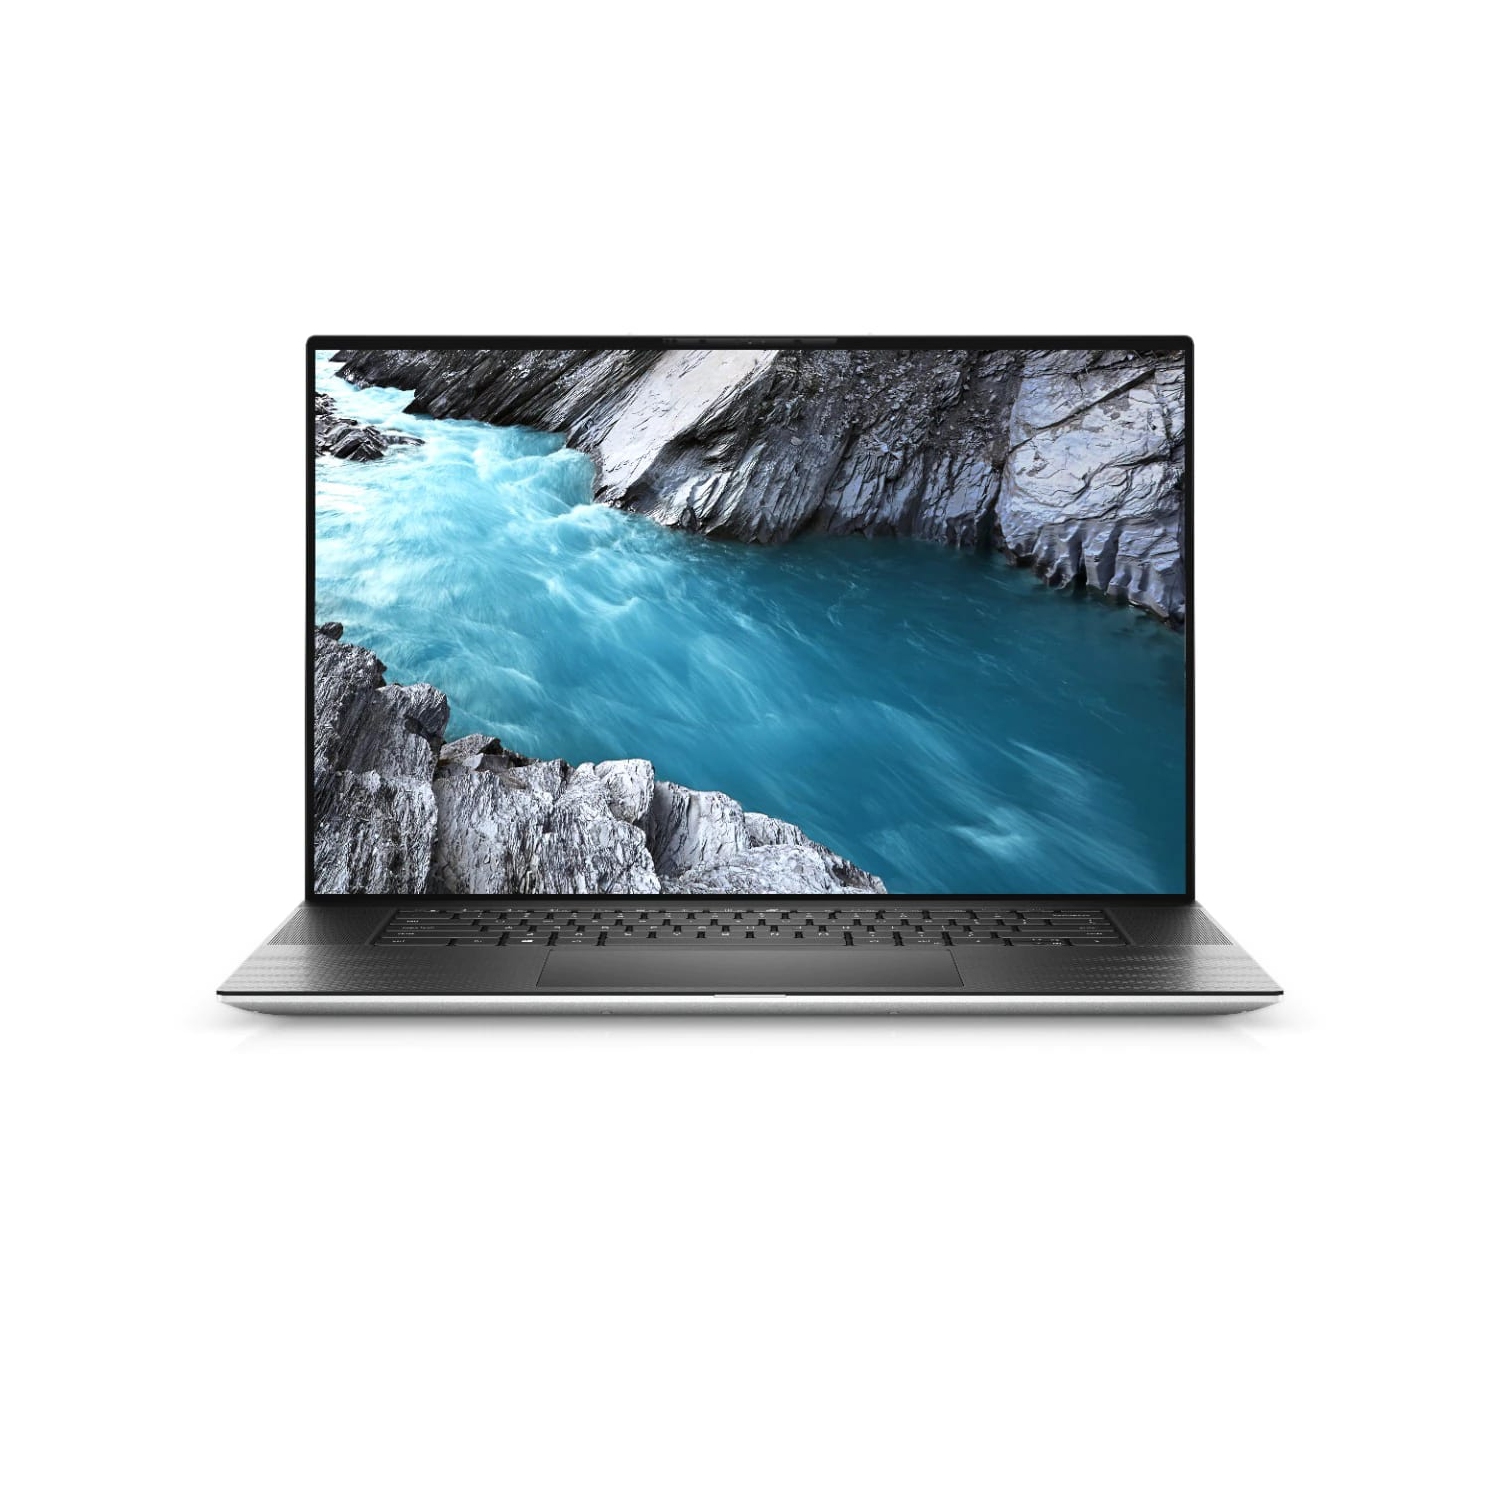 Refurbished (Excellent) - Dell XPS 17 9700 Laptop (2020) | 17" 4K Touch | Core i7 - 512GB SSD - 64GB RAM - 1650 Ti | 6 Cores @ 5 GHz - 10th Gen CPU Certified Refurbished